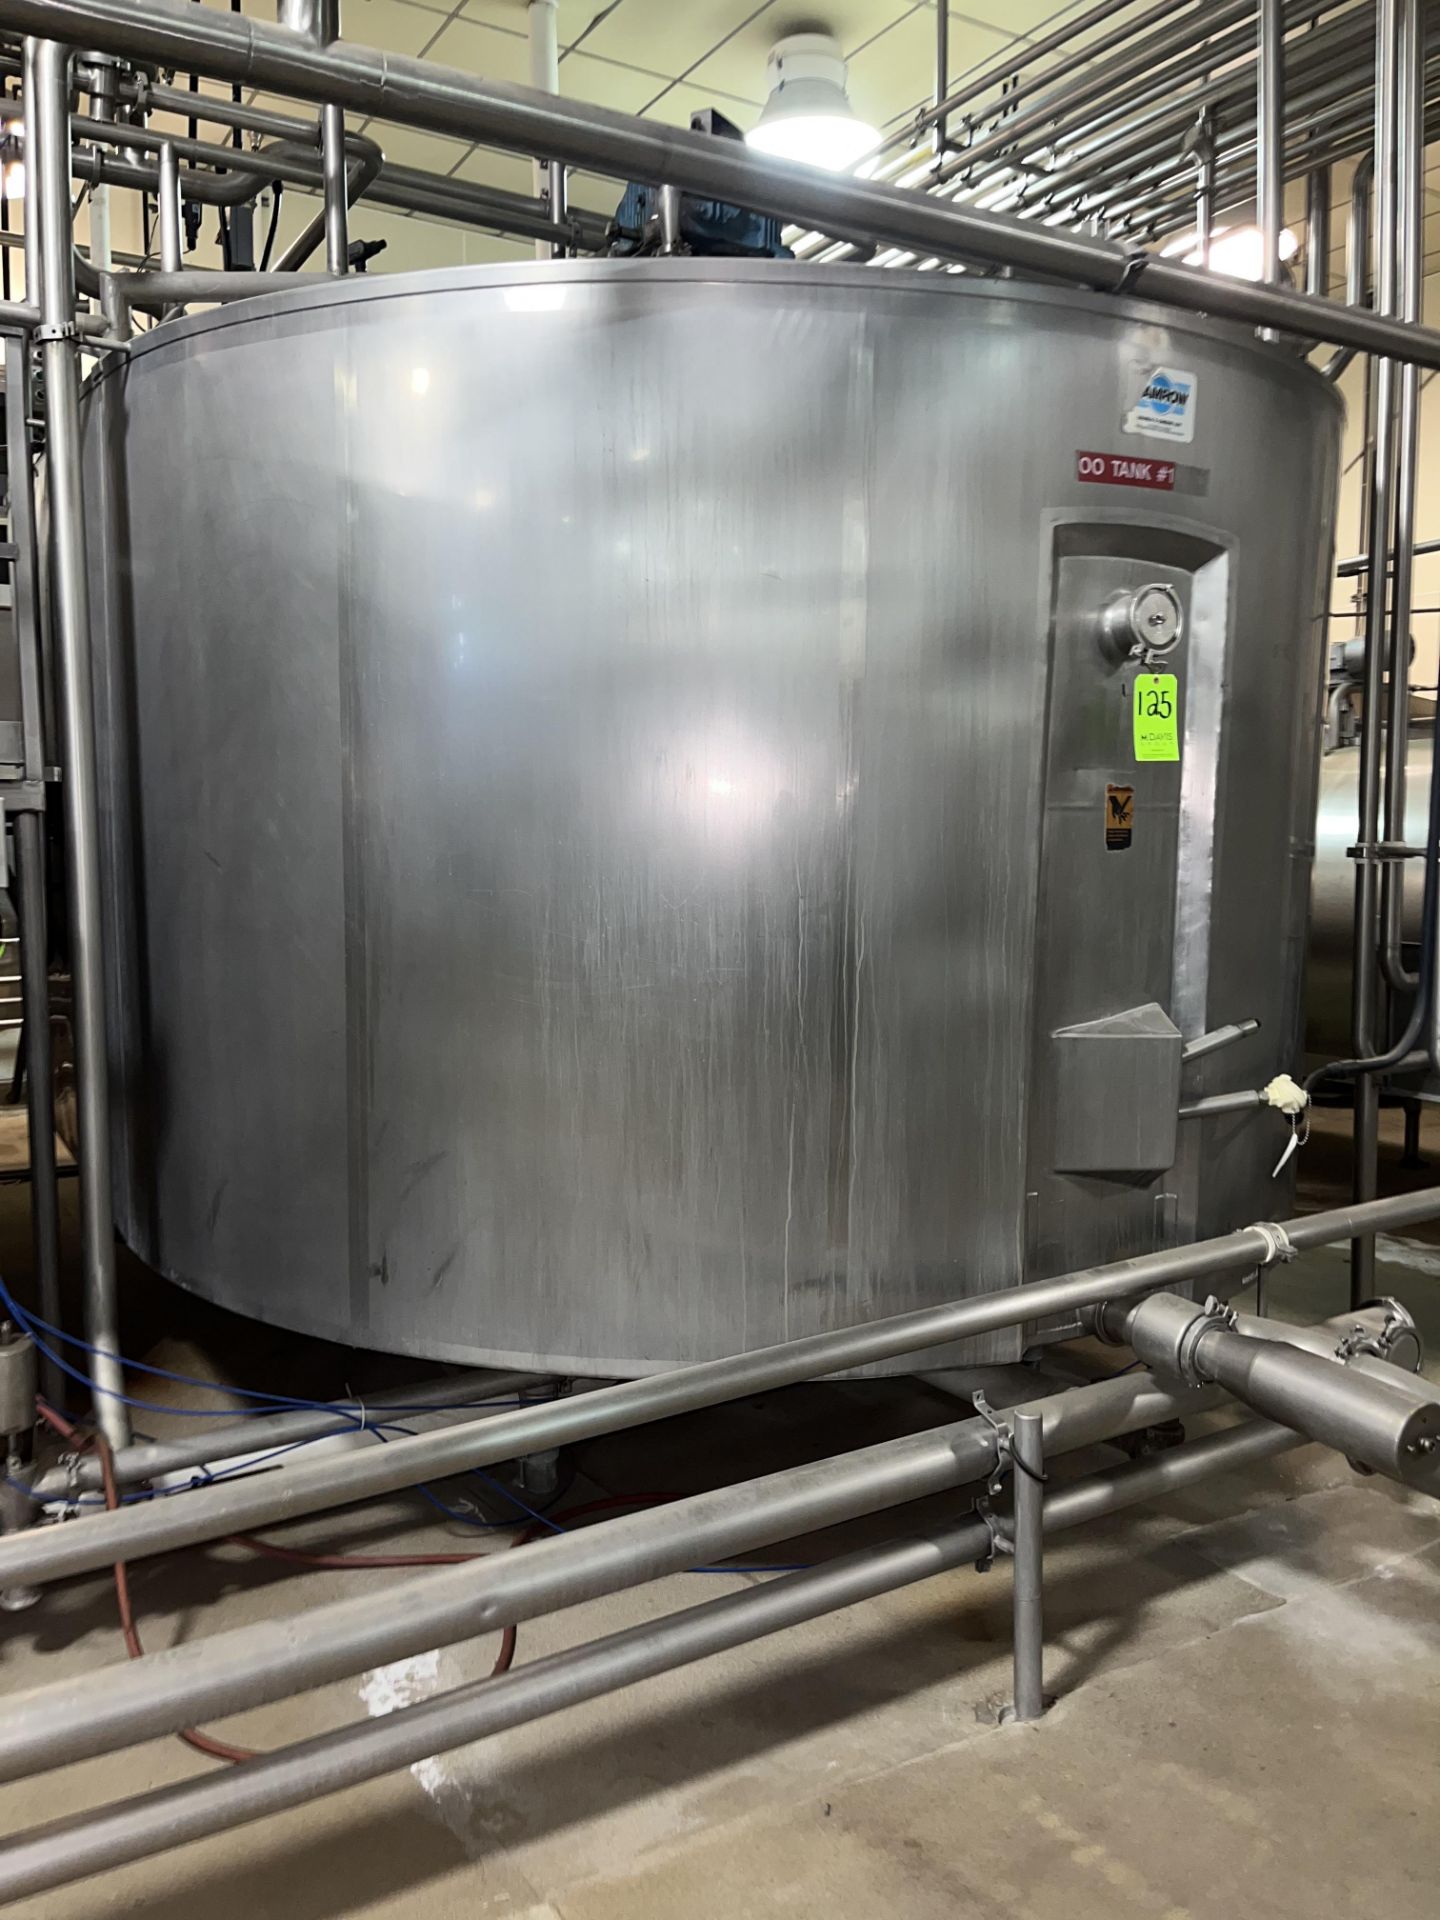 Damrow Double O S/S Cheese Vat (OO Tank #1) (LOCATED IN MANTECA, CA) - Image 15 of 15